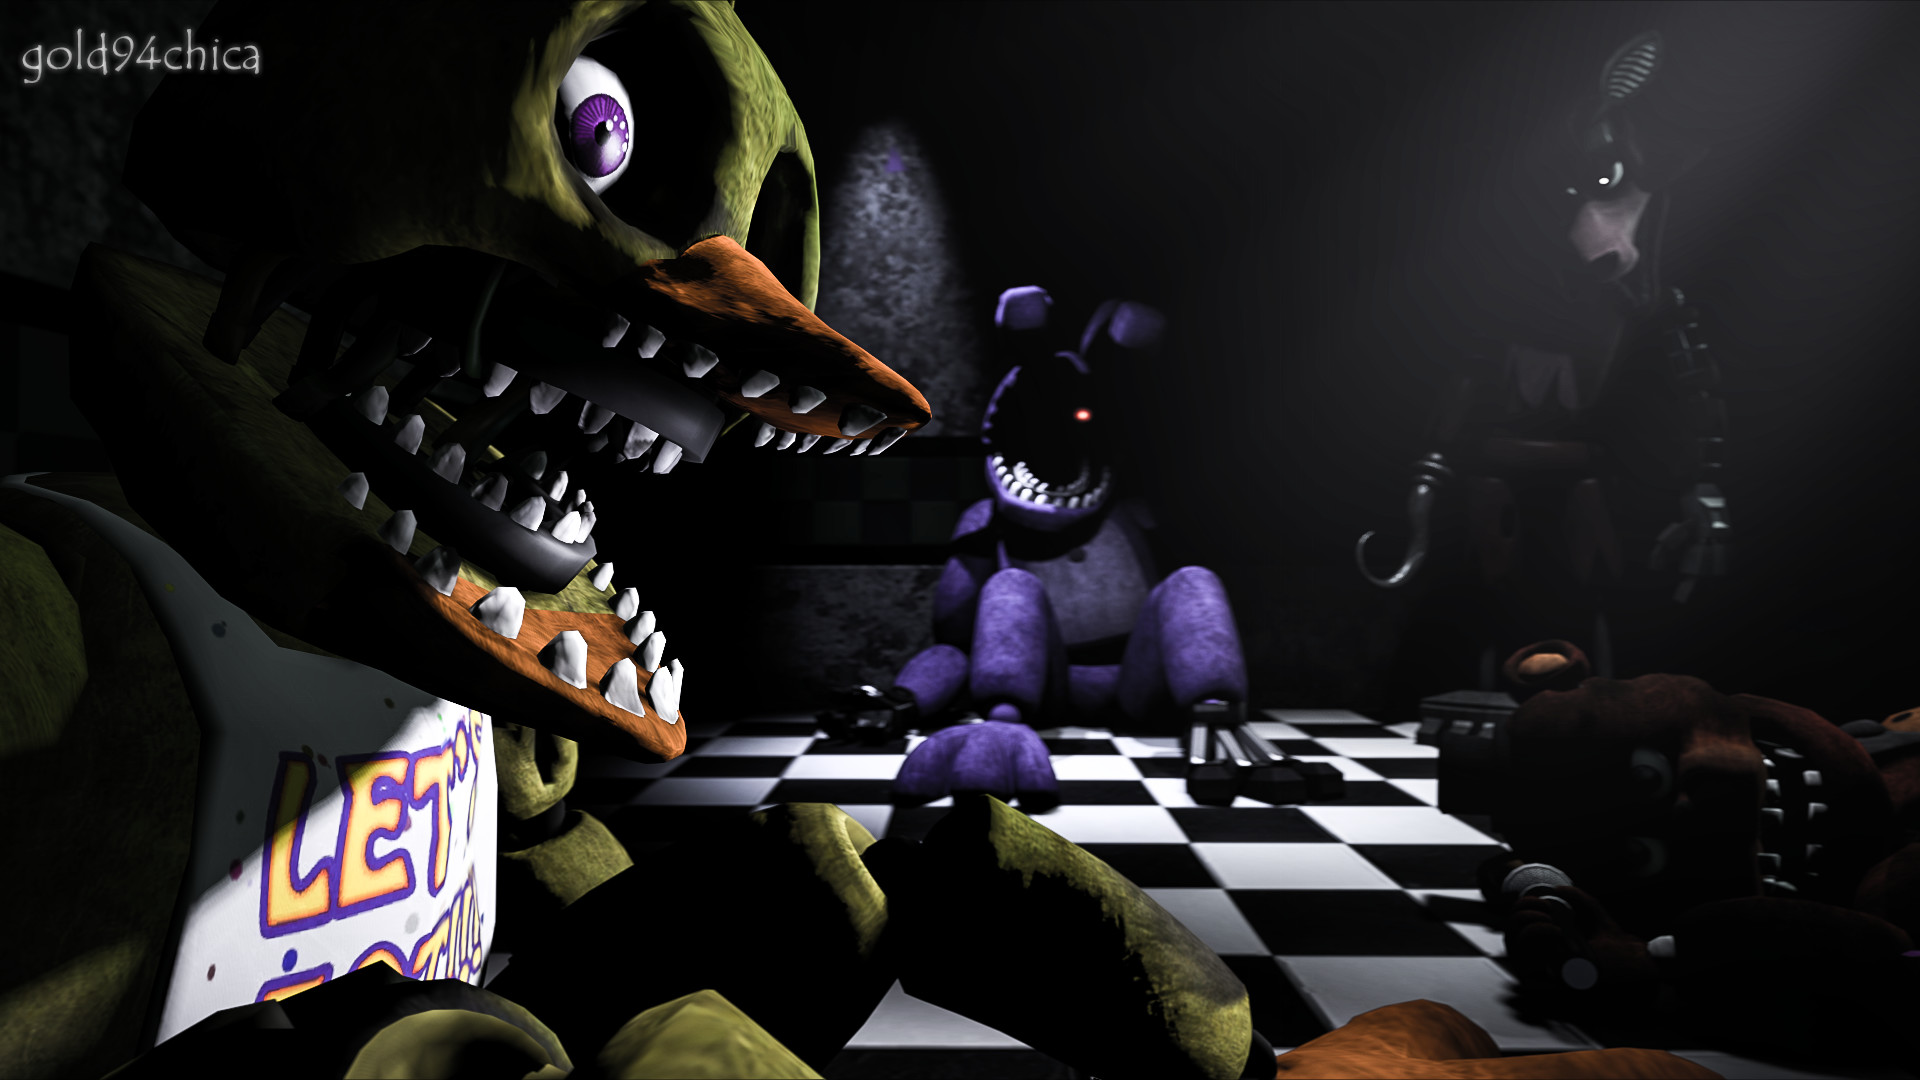 1920x1080 ... Five Nights at Freddy's 2 Wallpaper - Old F, B, C by PeterPack on ...